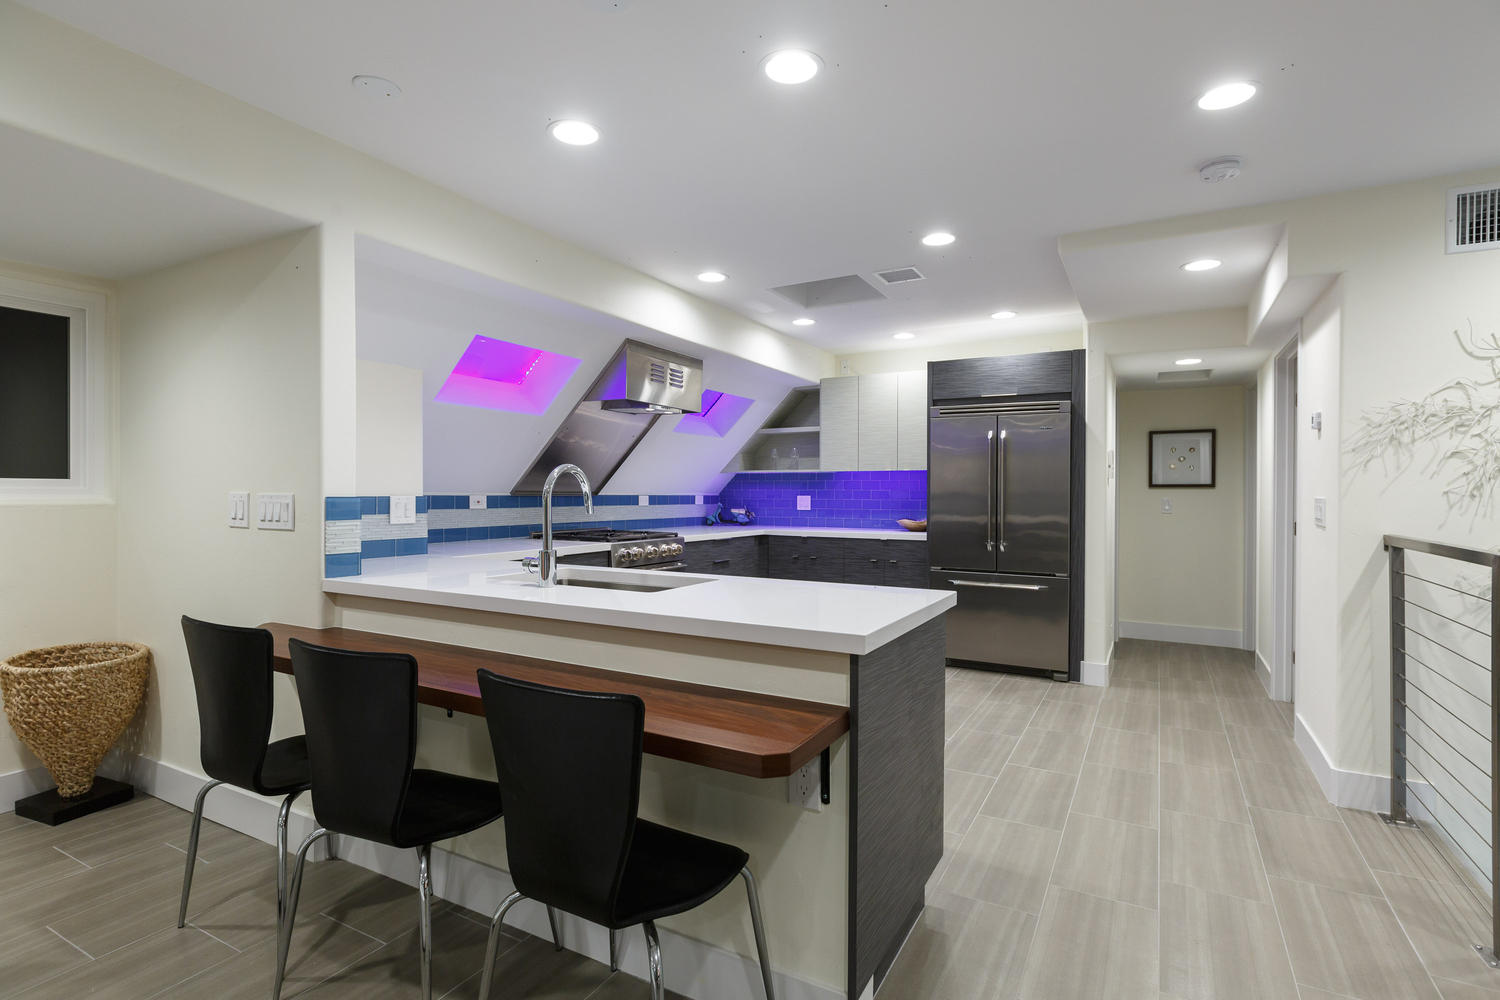 Pacific Dream Penthouse Kitchen with High End Appliances and Housewares, San Diego Luxury Oceanfront Vacation Rental